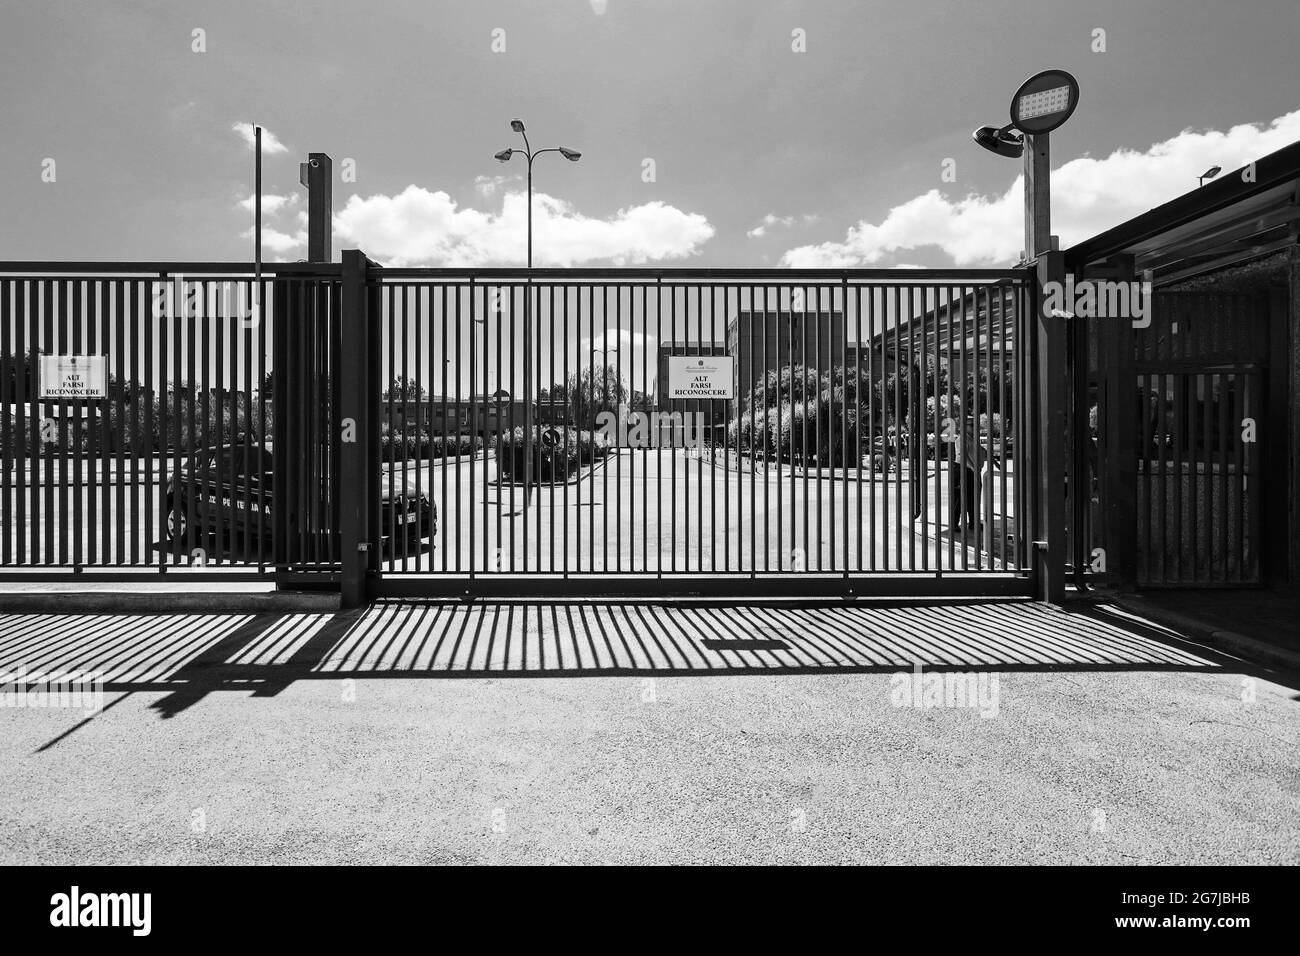 Napoli, ITALIA. 13th July, 2021. 07/14/2021 Santa Maria Capua to see, the Prime Minister Mario Draghi and the Minister of Justice visit the penitentiary which was the scene of violence against the prisoners. Credit: Fabio Sasso/ZUMA Wire/Alamy Live News Stock Photo